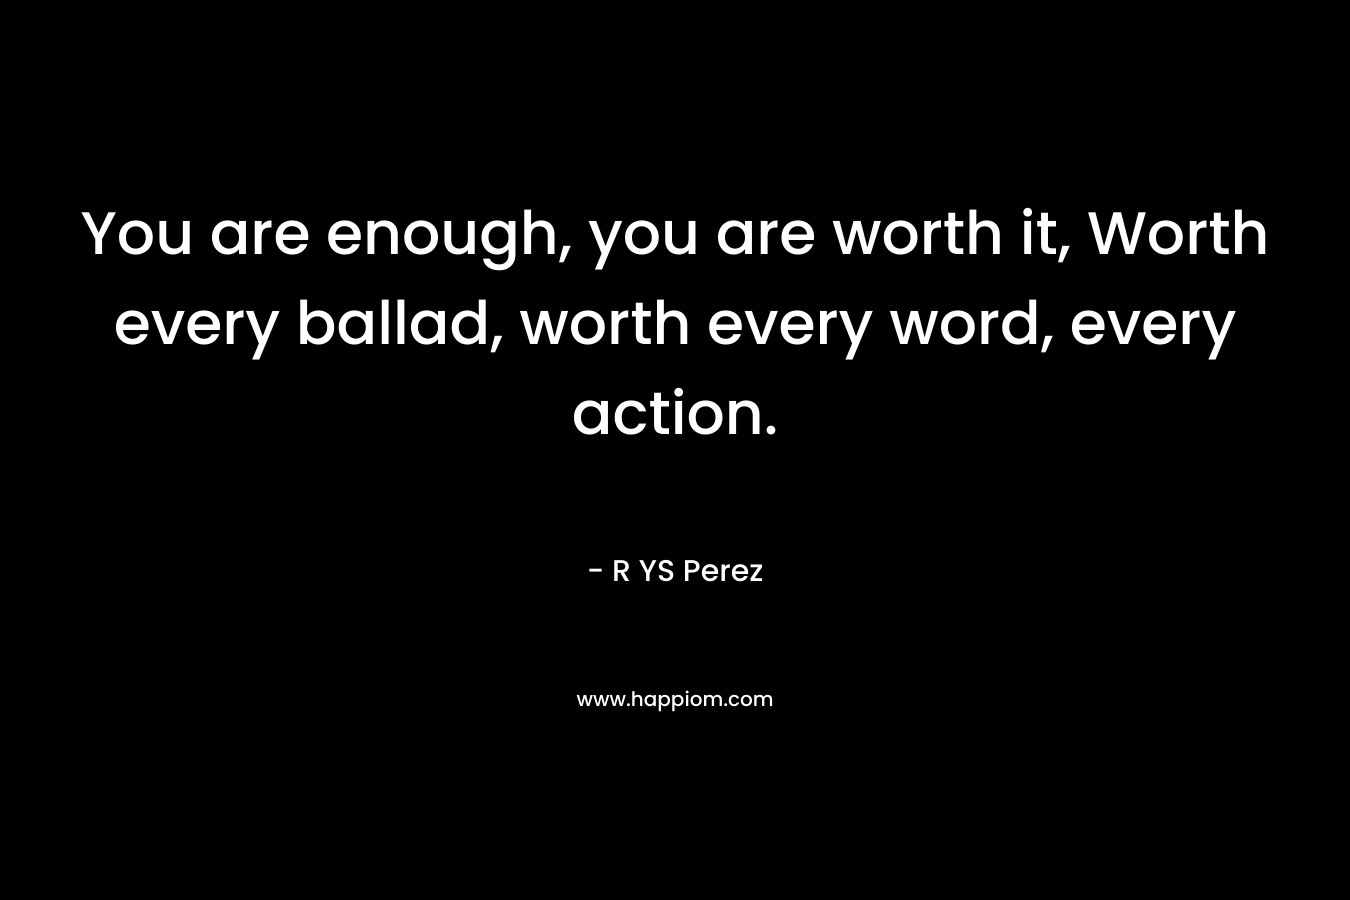 You are enough, you are worth it, Worth every ballad, worth every word, every action.